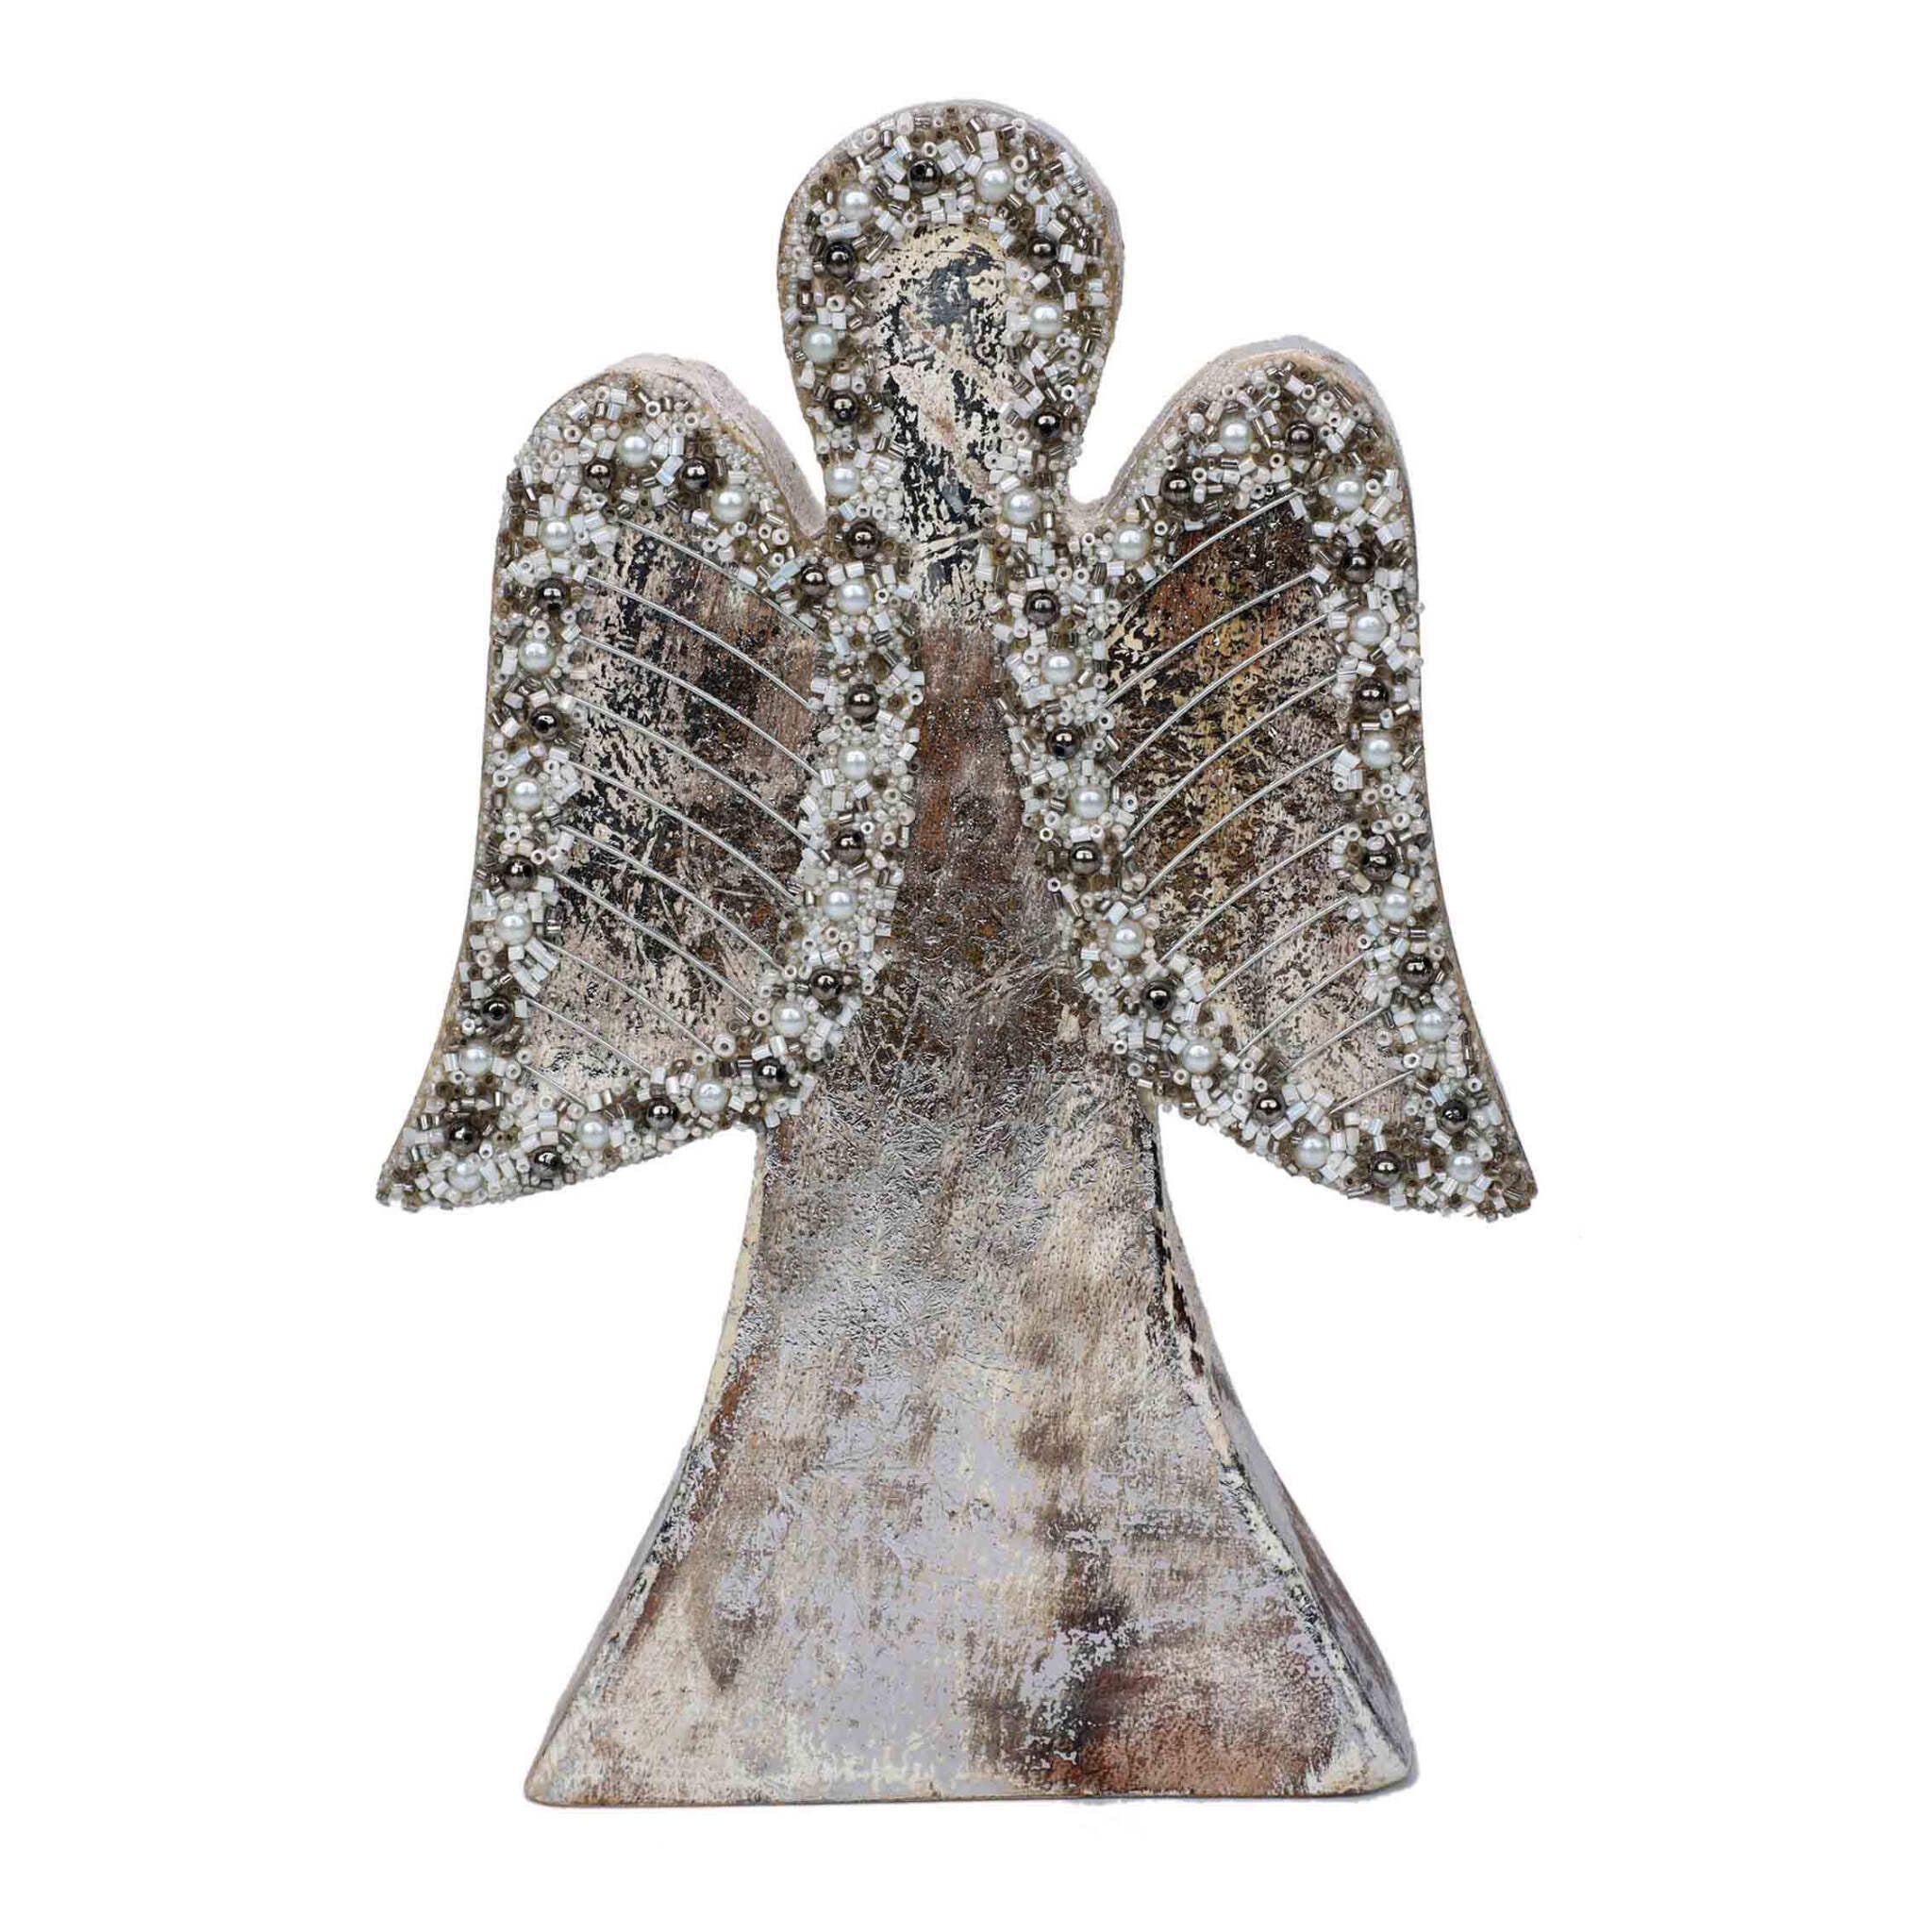 Send Me an Angel Wood Sculpture in Silver & White